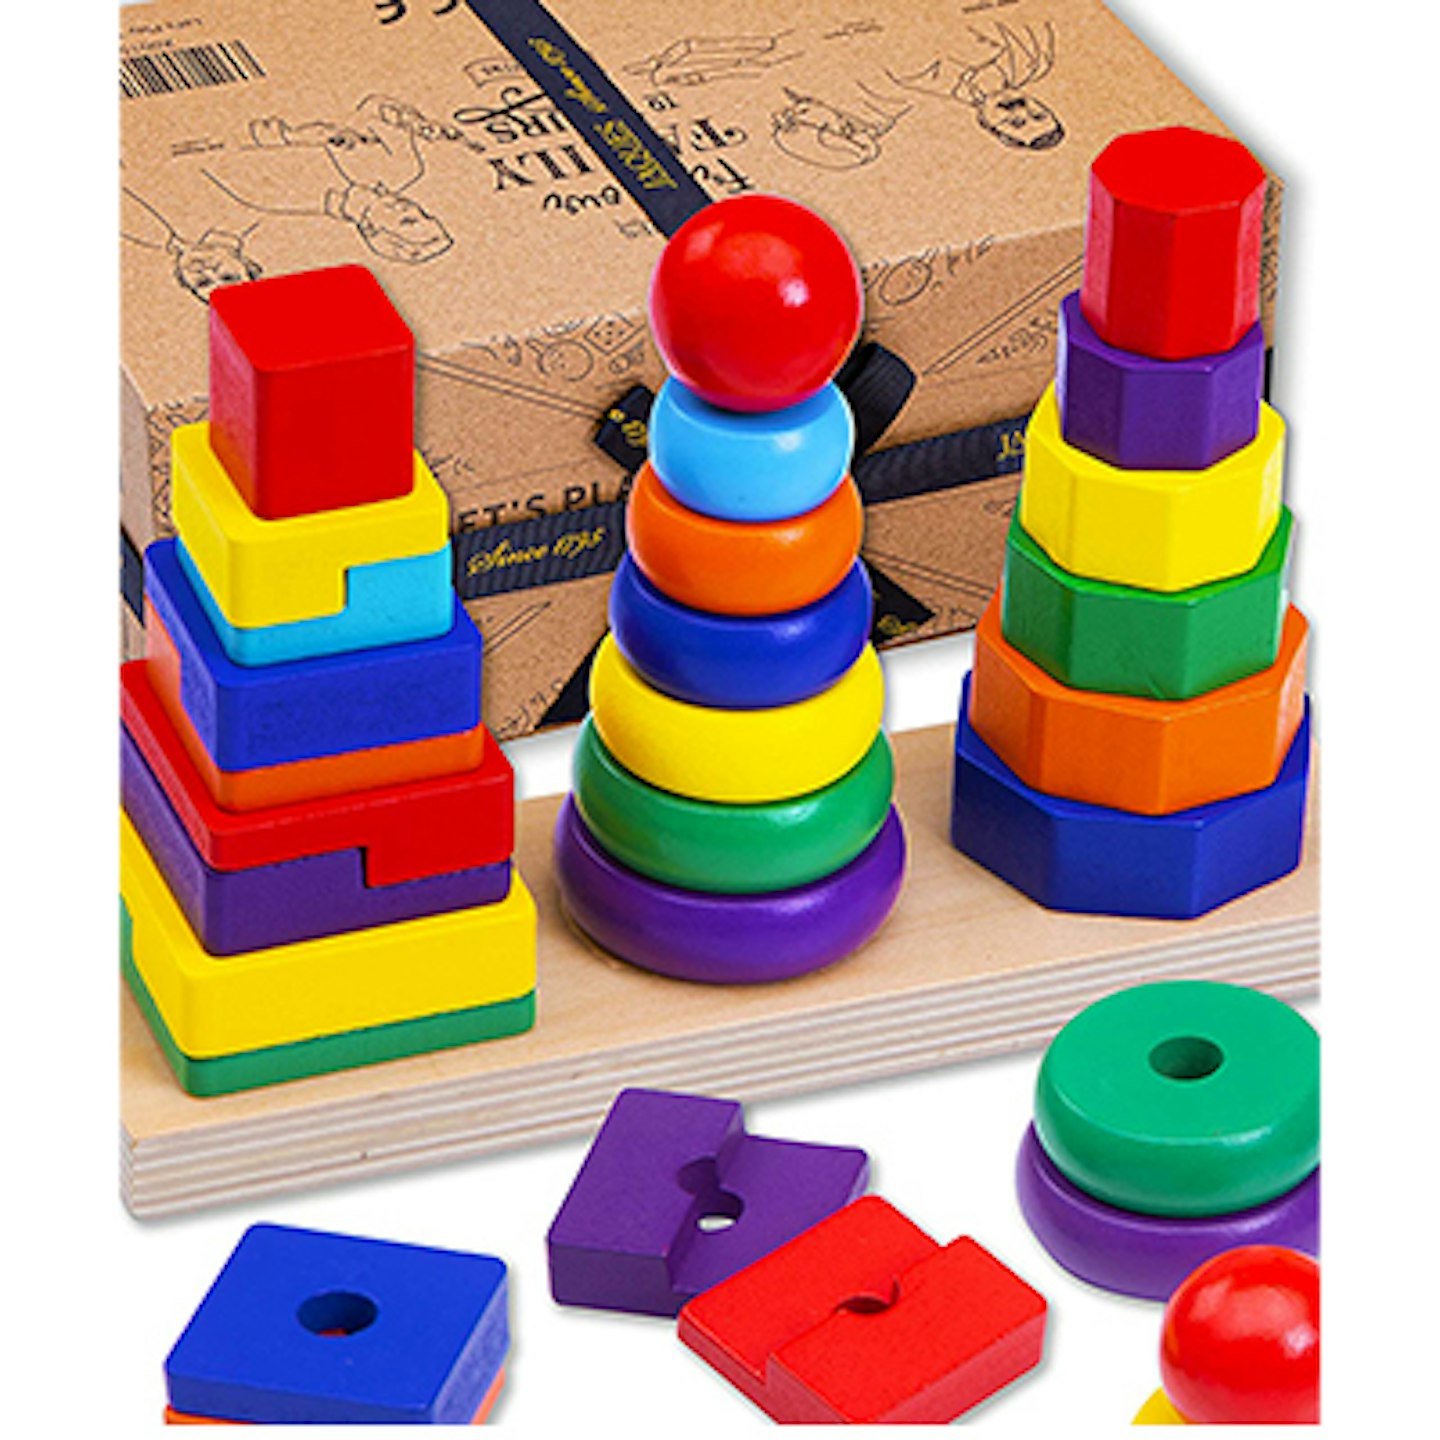 Jaques of London Wooden Stacking Toys